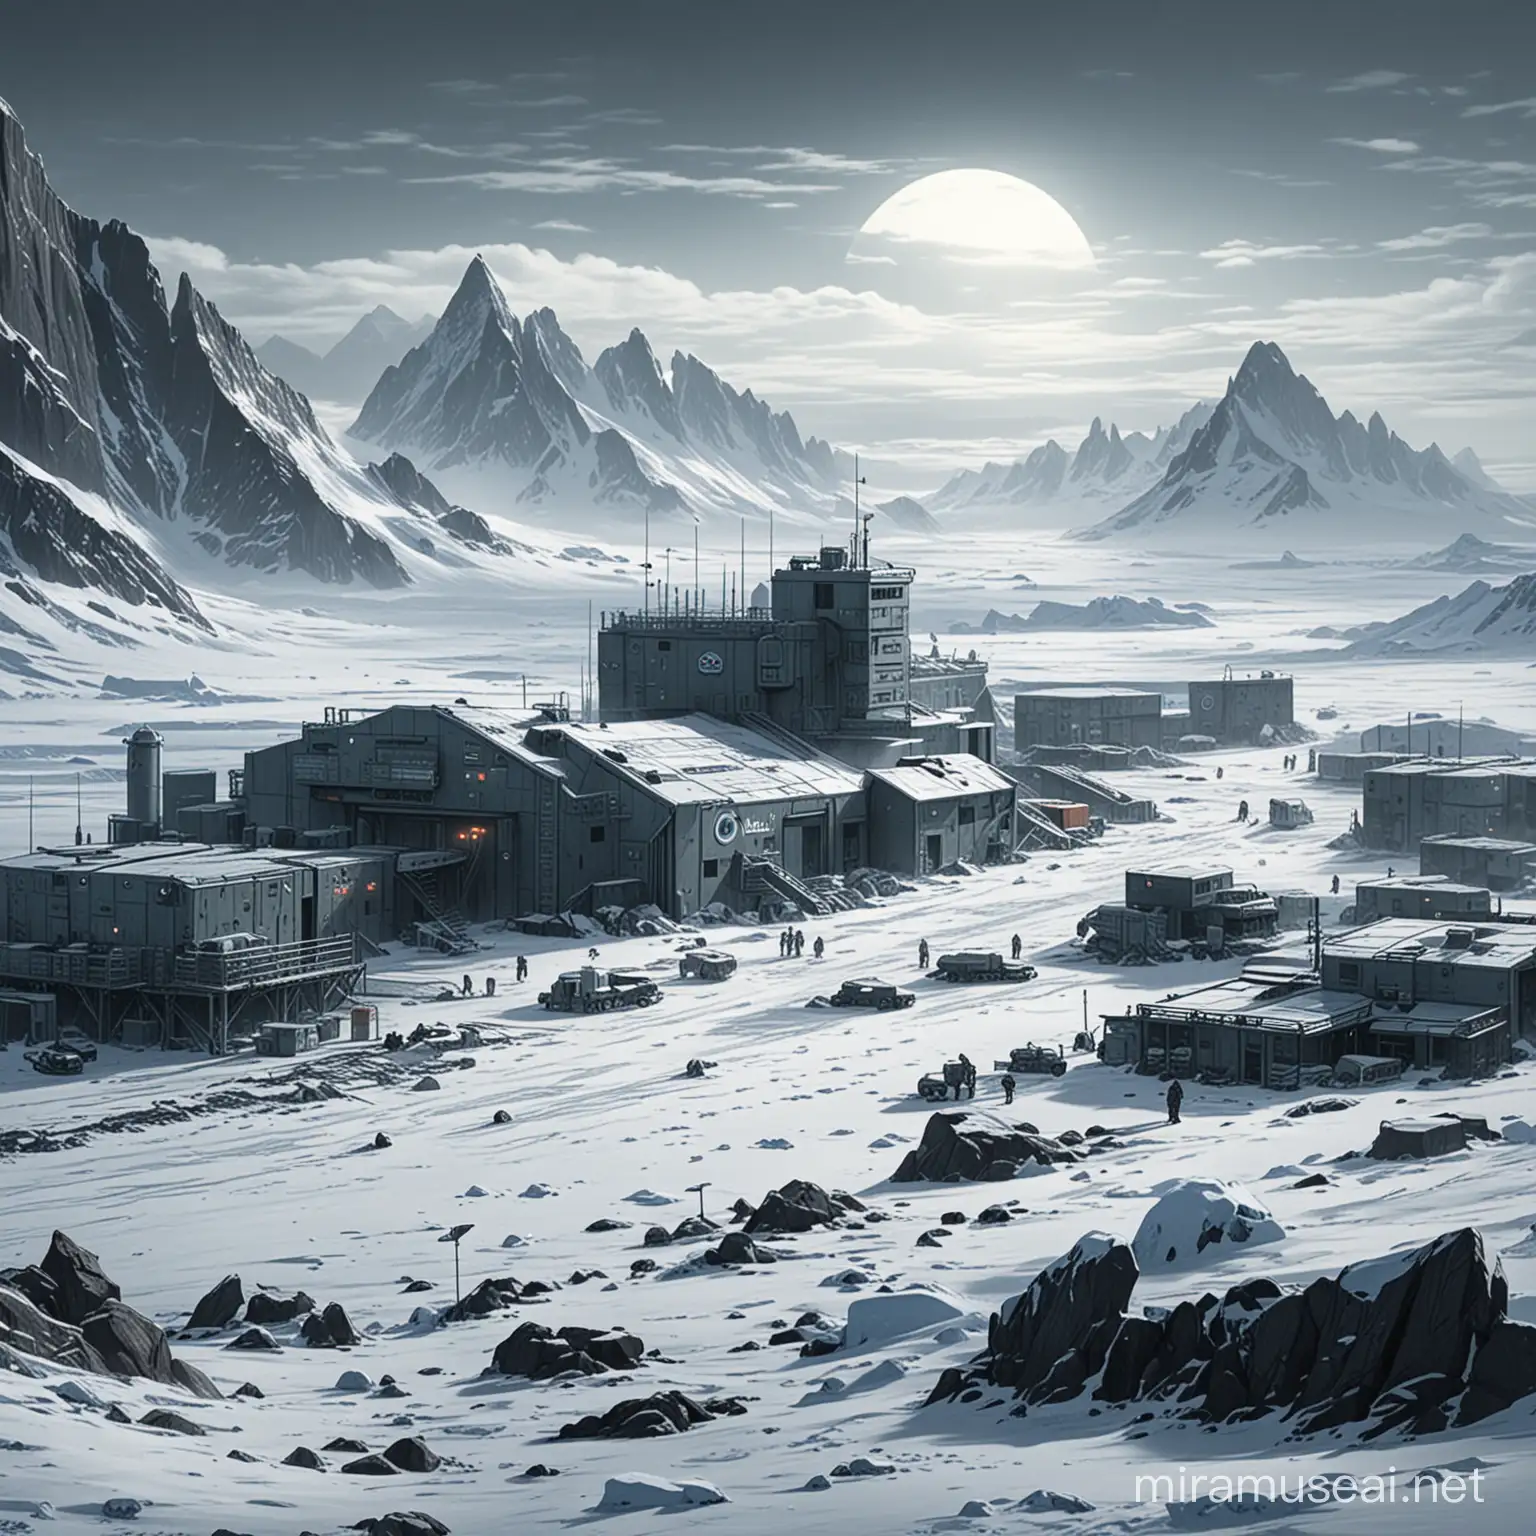 SciFi Dystopia Antarctic Military Station in Comics Style